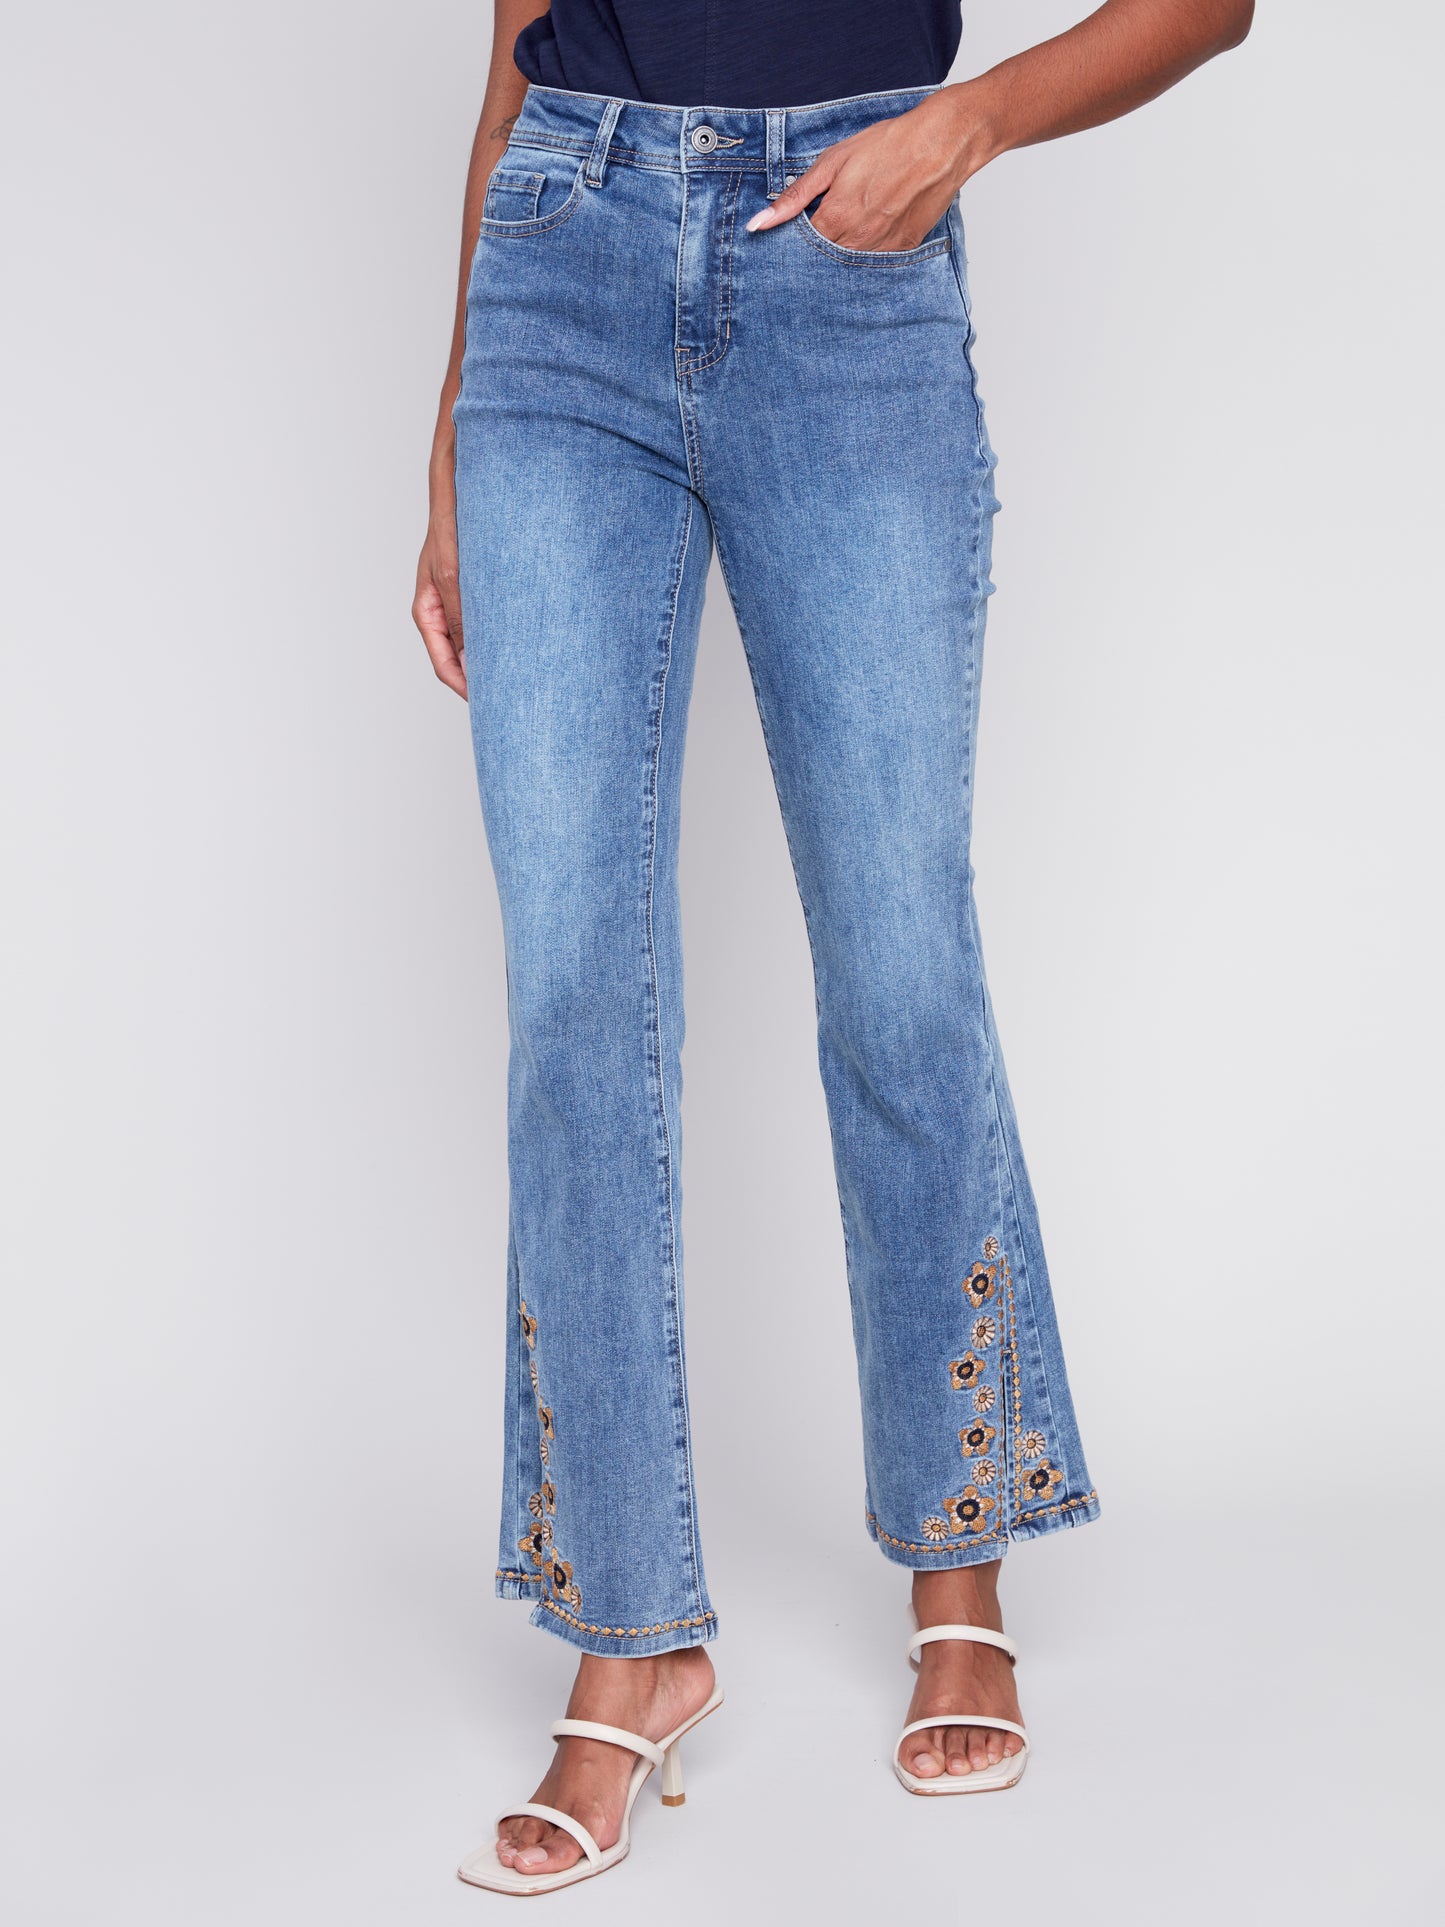 A woman exuding retro vibes in a pair of Charlie B's Slit Bell Bottom Jeans with Embroidered Slits.